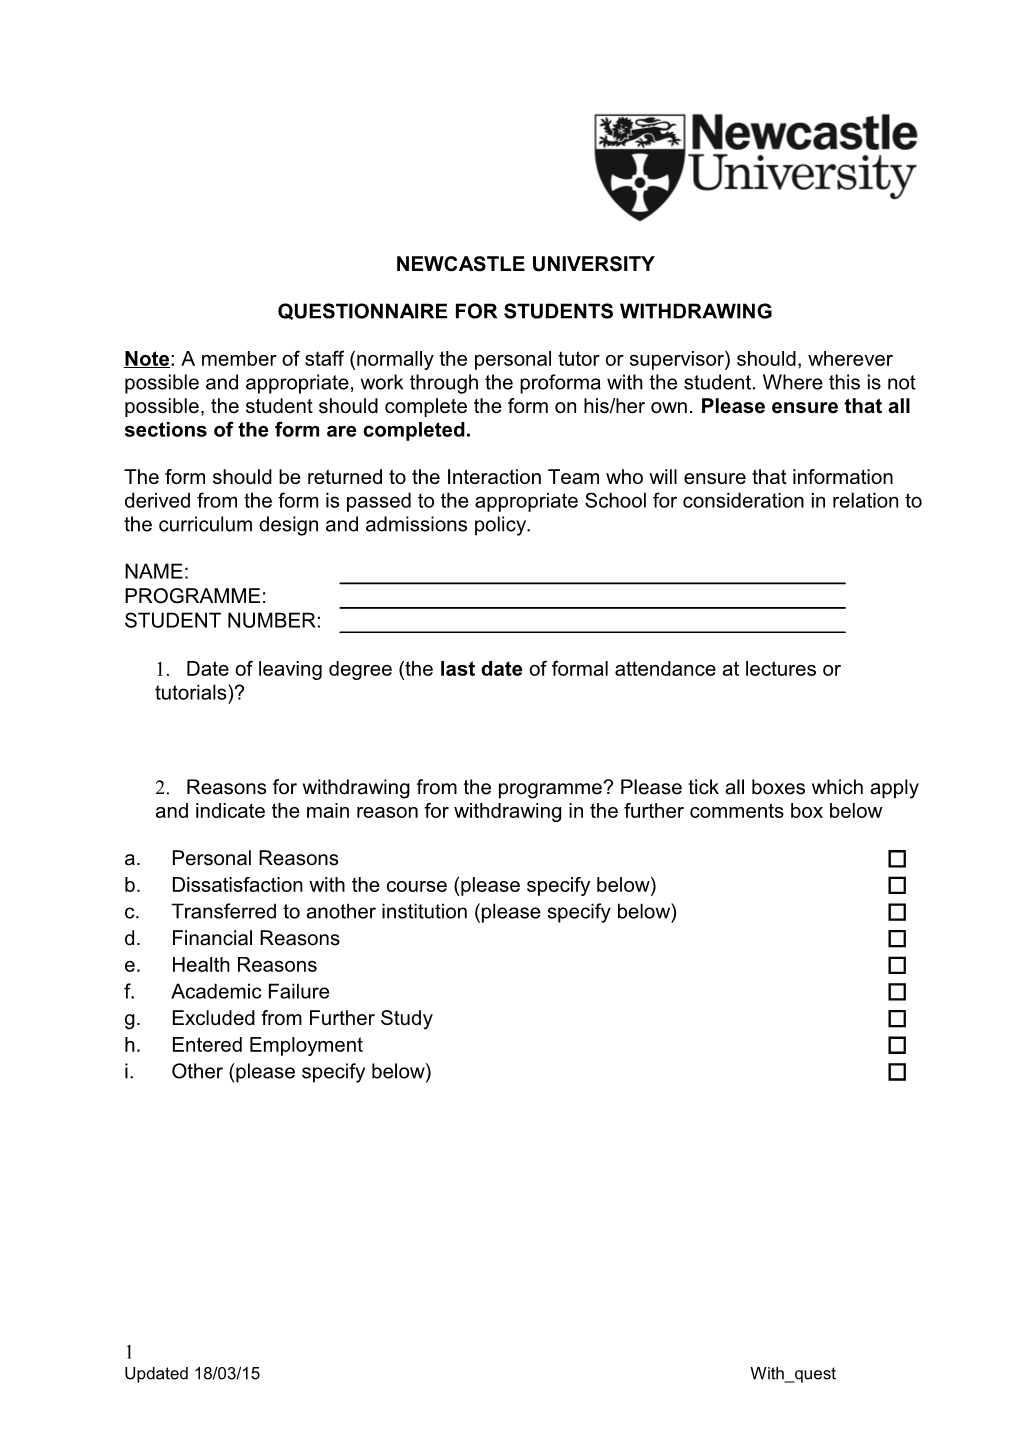 Questionnaire for Students Withdrawing